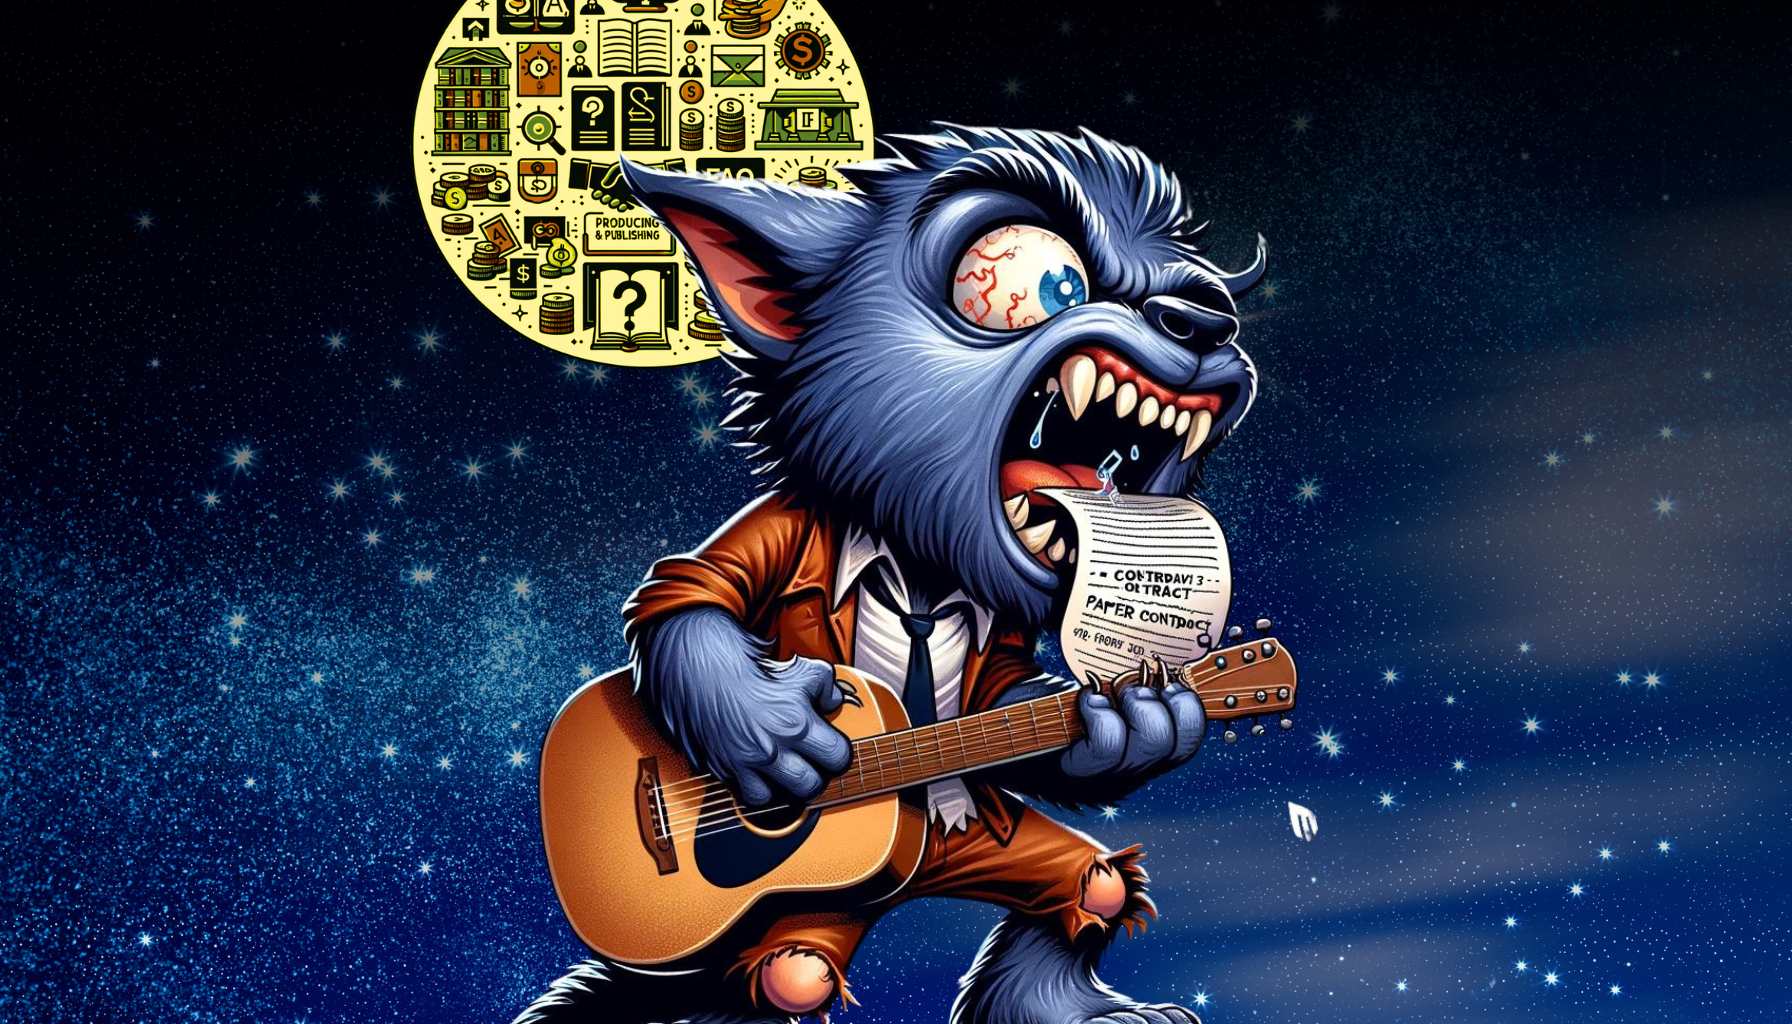 music publishing laws and contracts being chewed up by a musician/producer werewolf